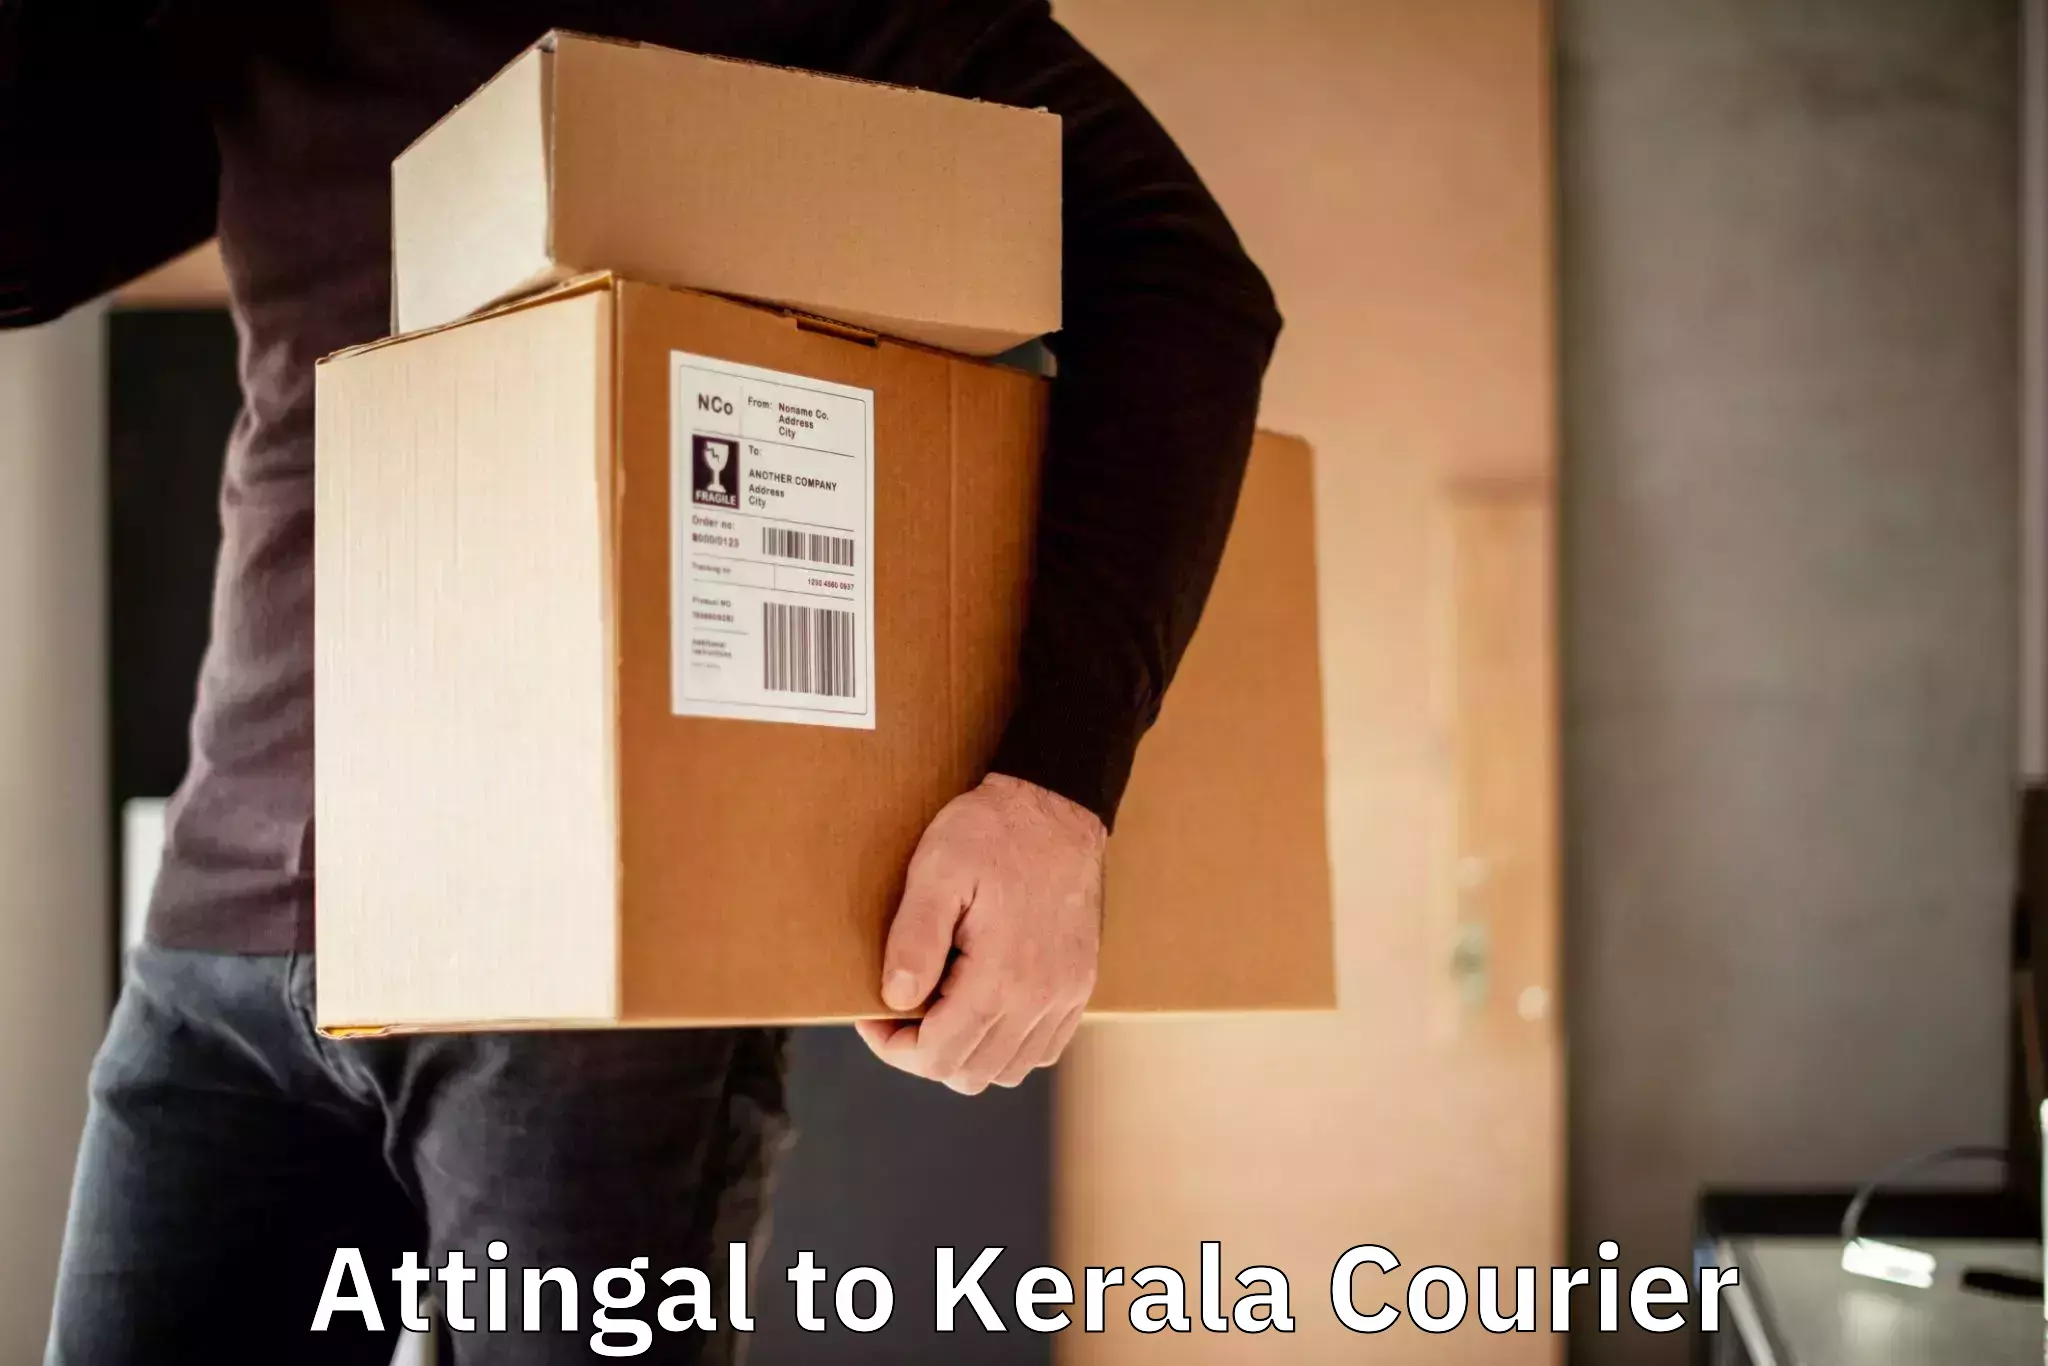 State-of-the-art courier technology Attingal to Kerala